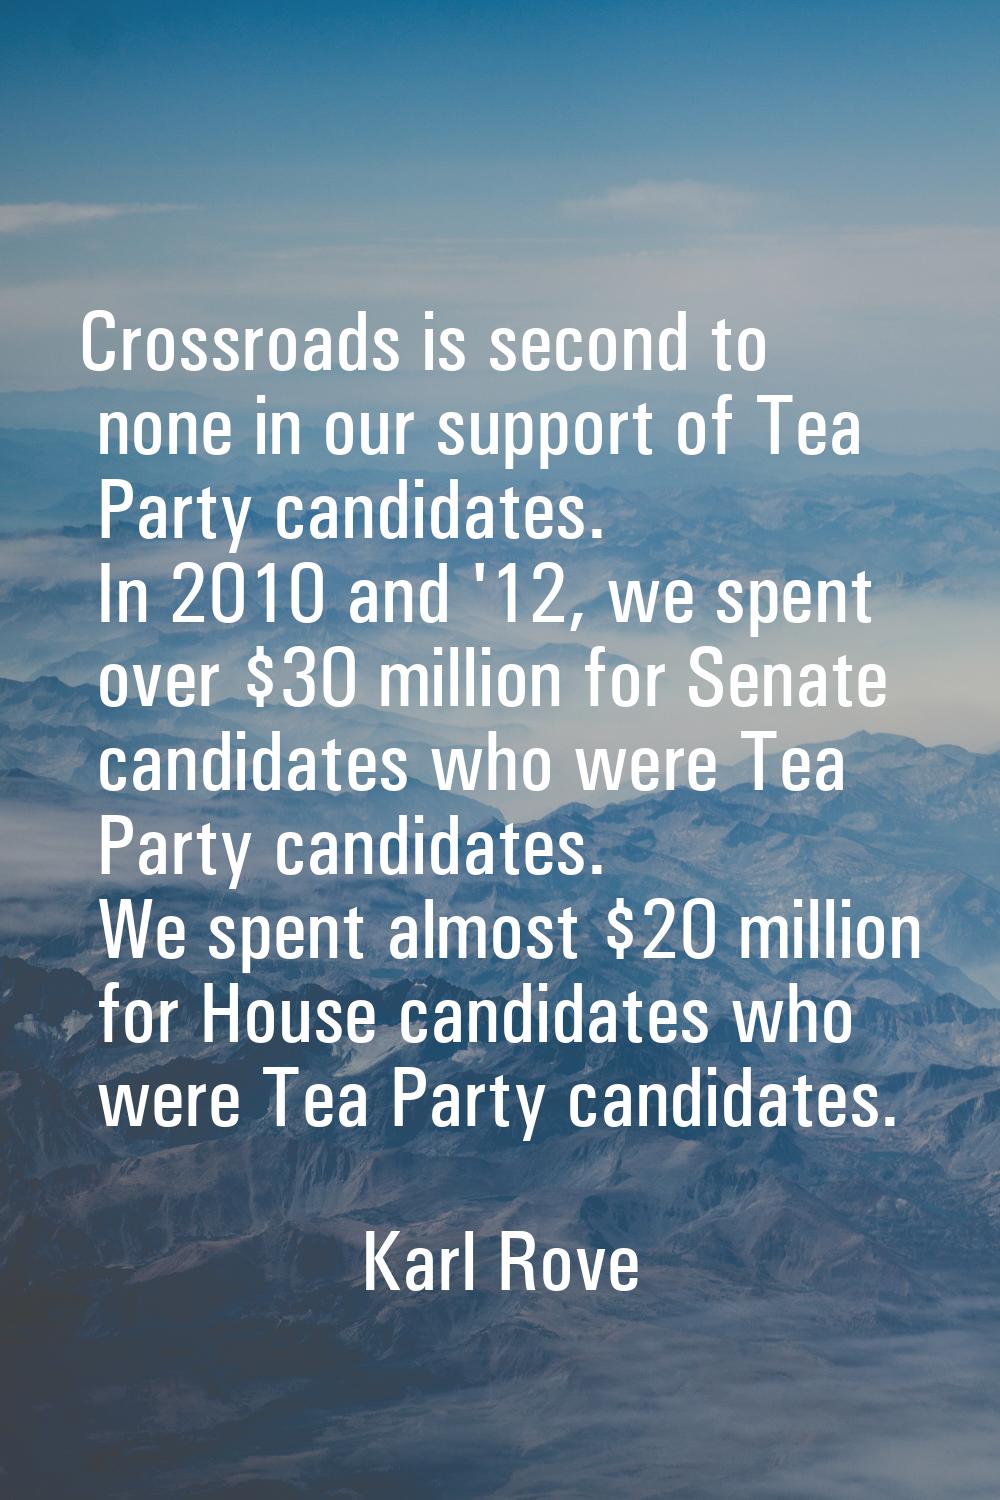 Crossroads is second to none in our support of Tea Party candidates. In 2010 and '12, we spent over